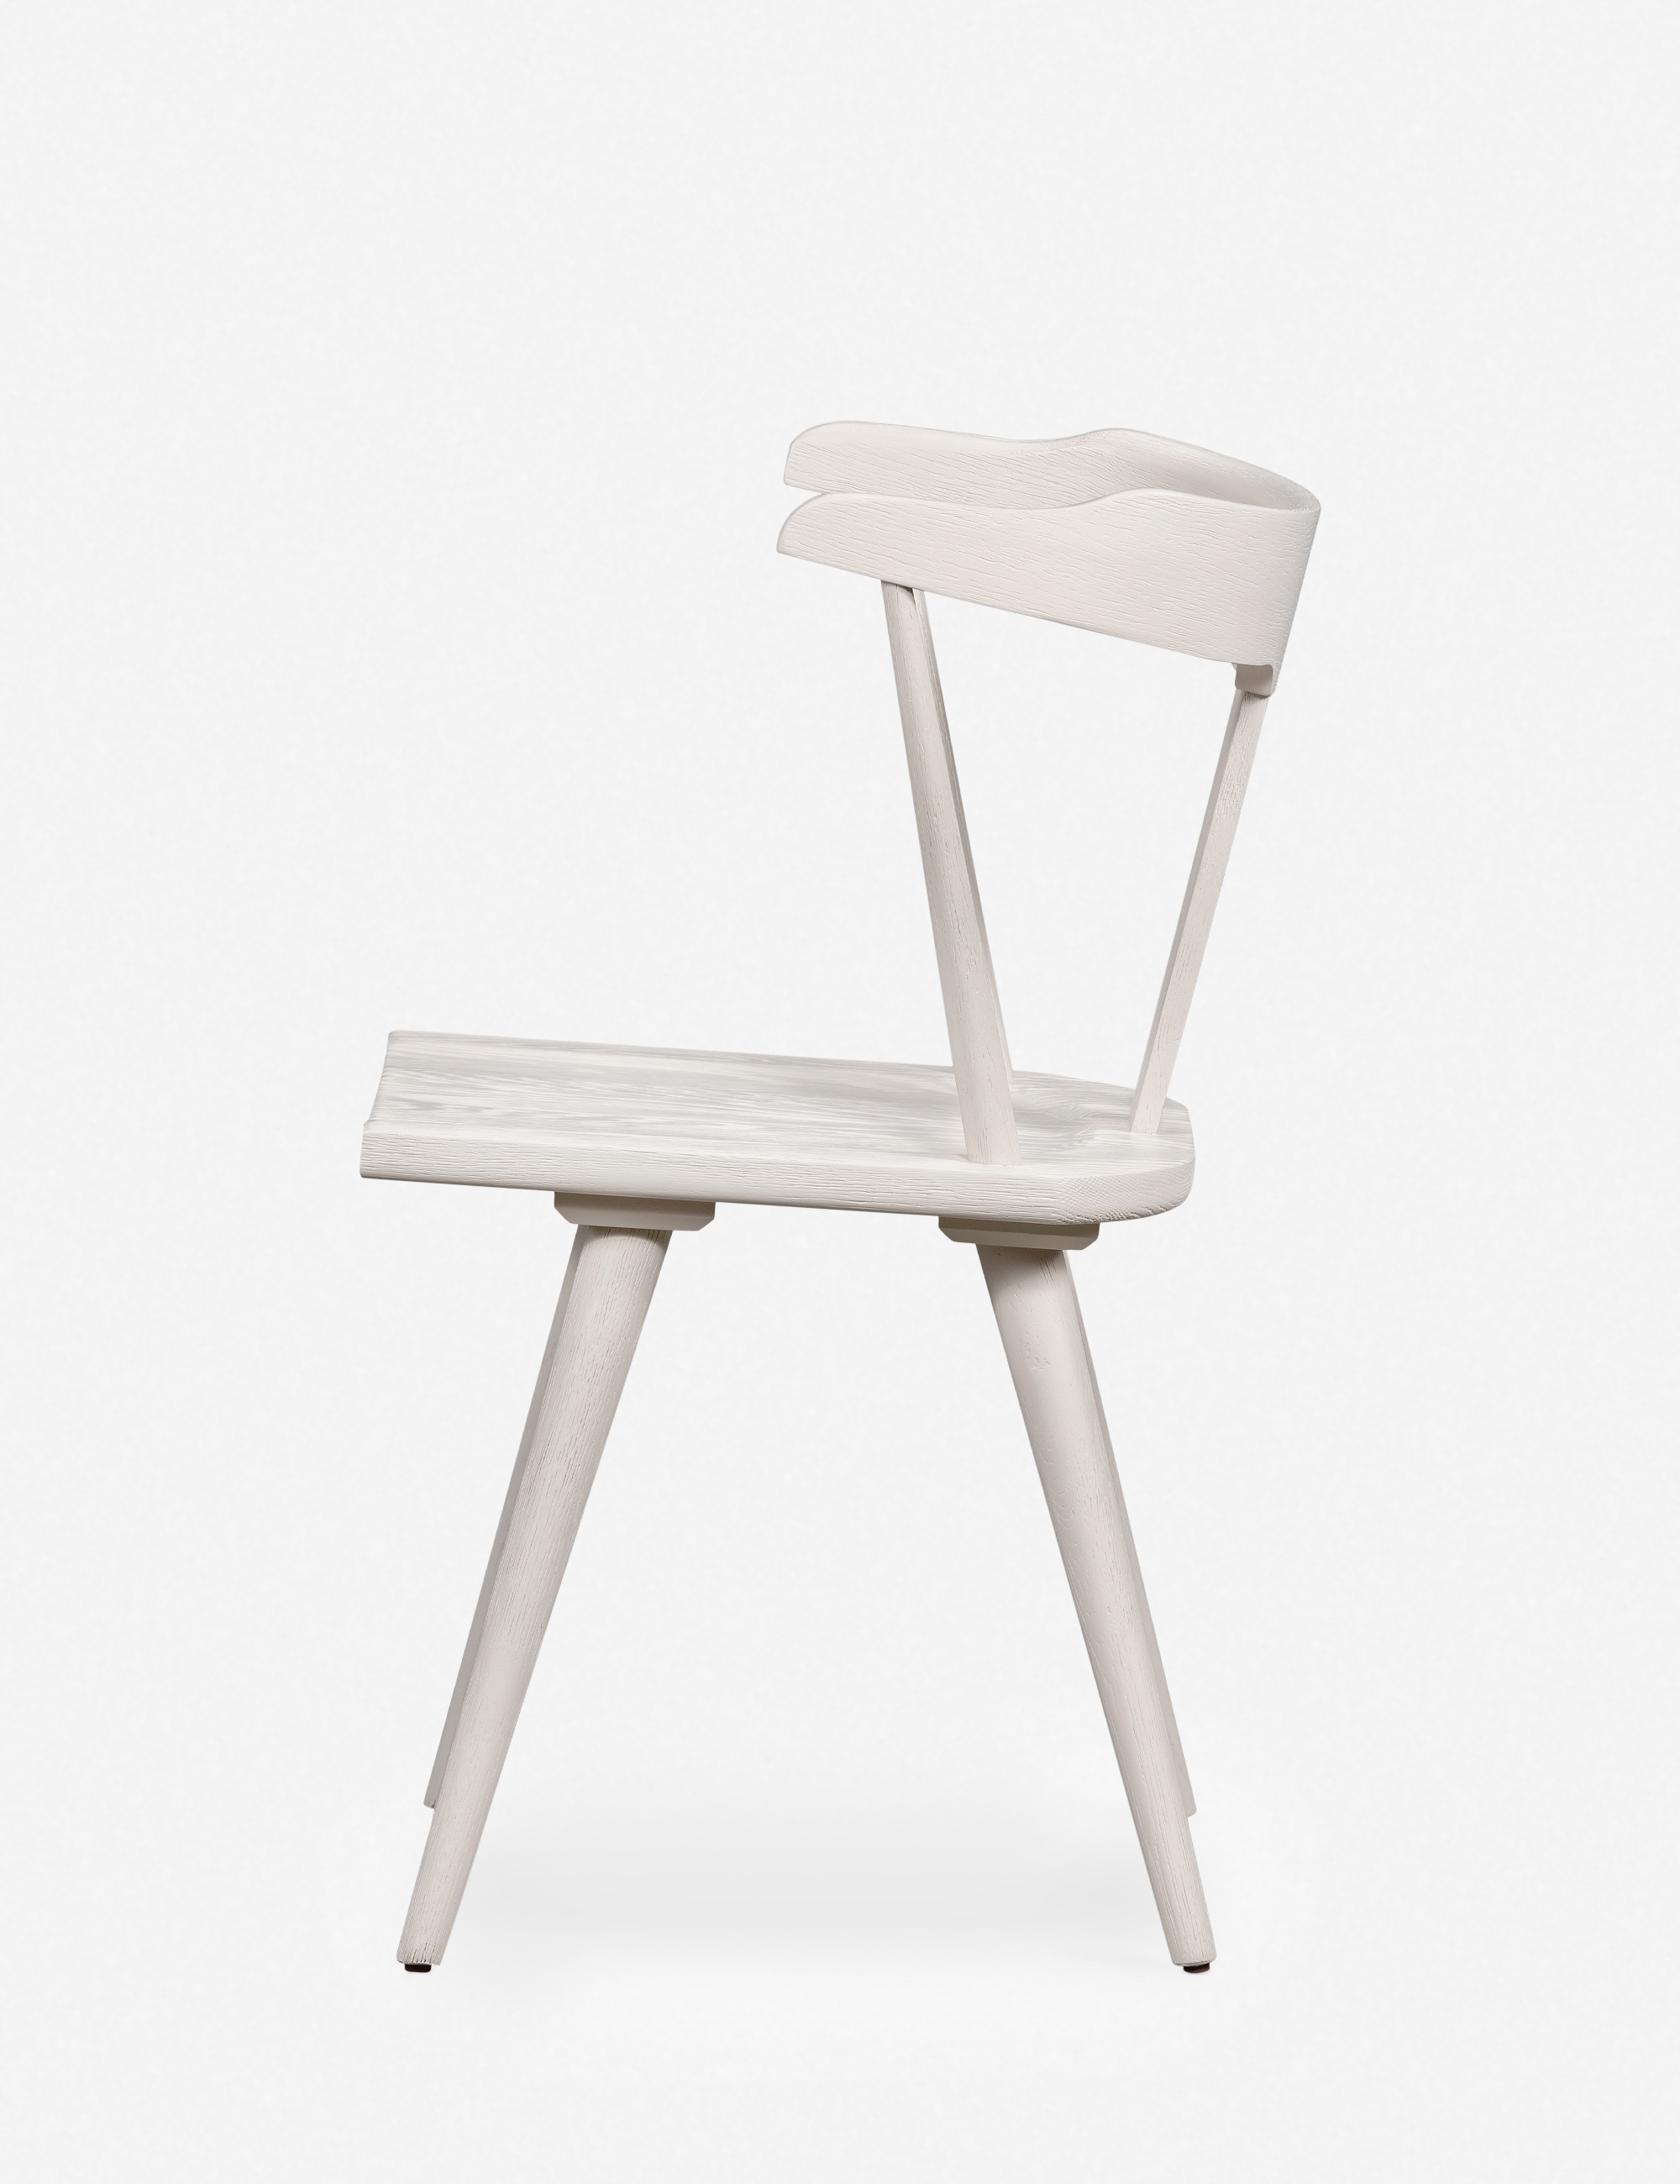 Lawnie Dining Chair - Image 2